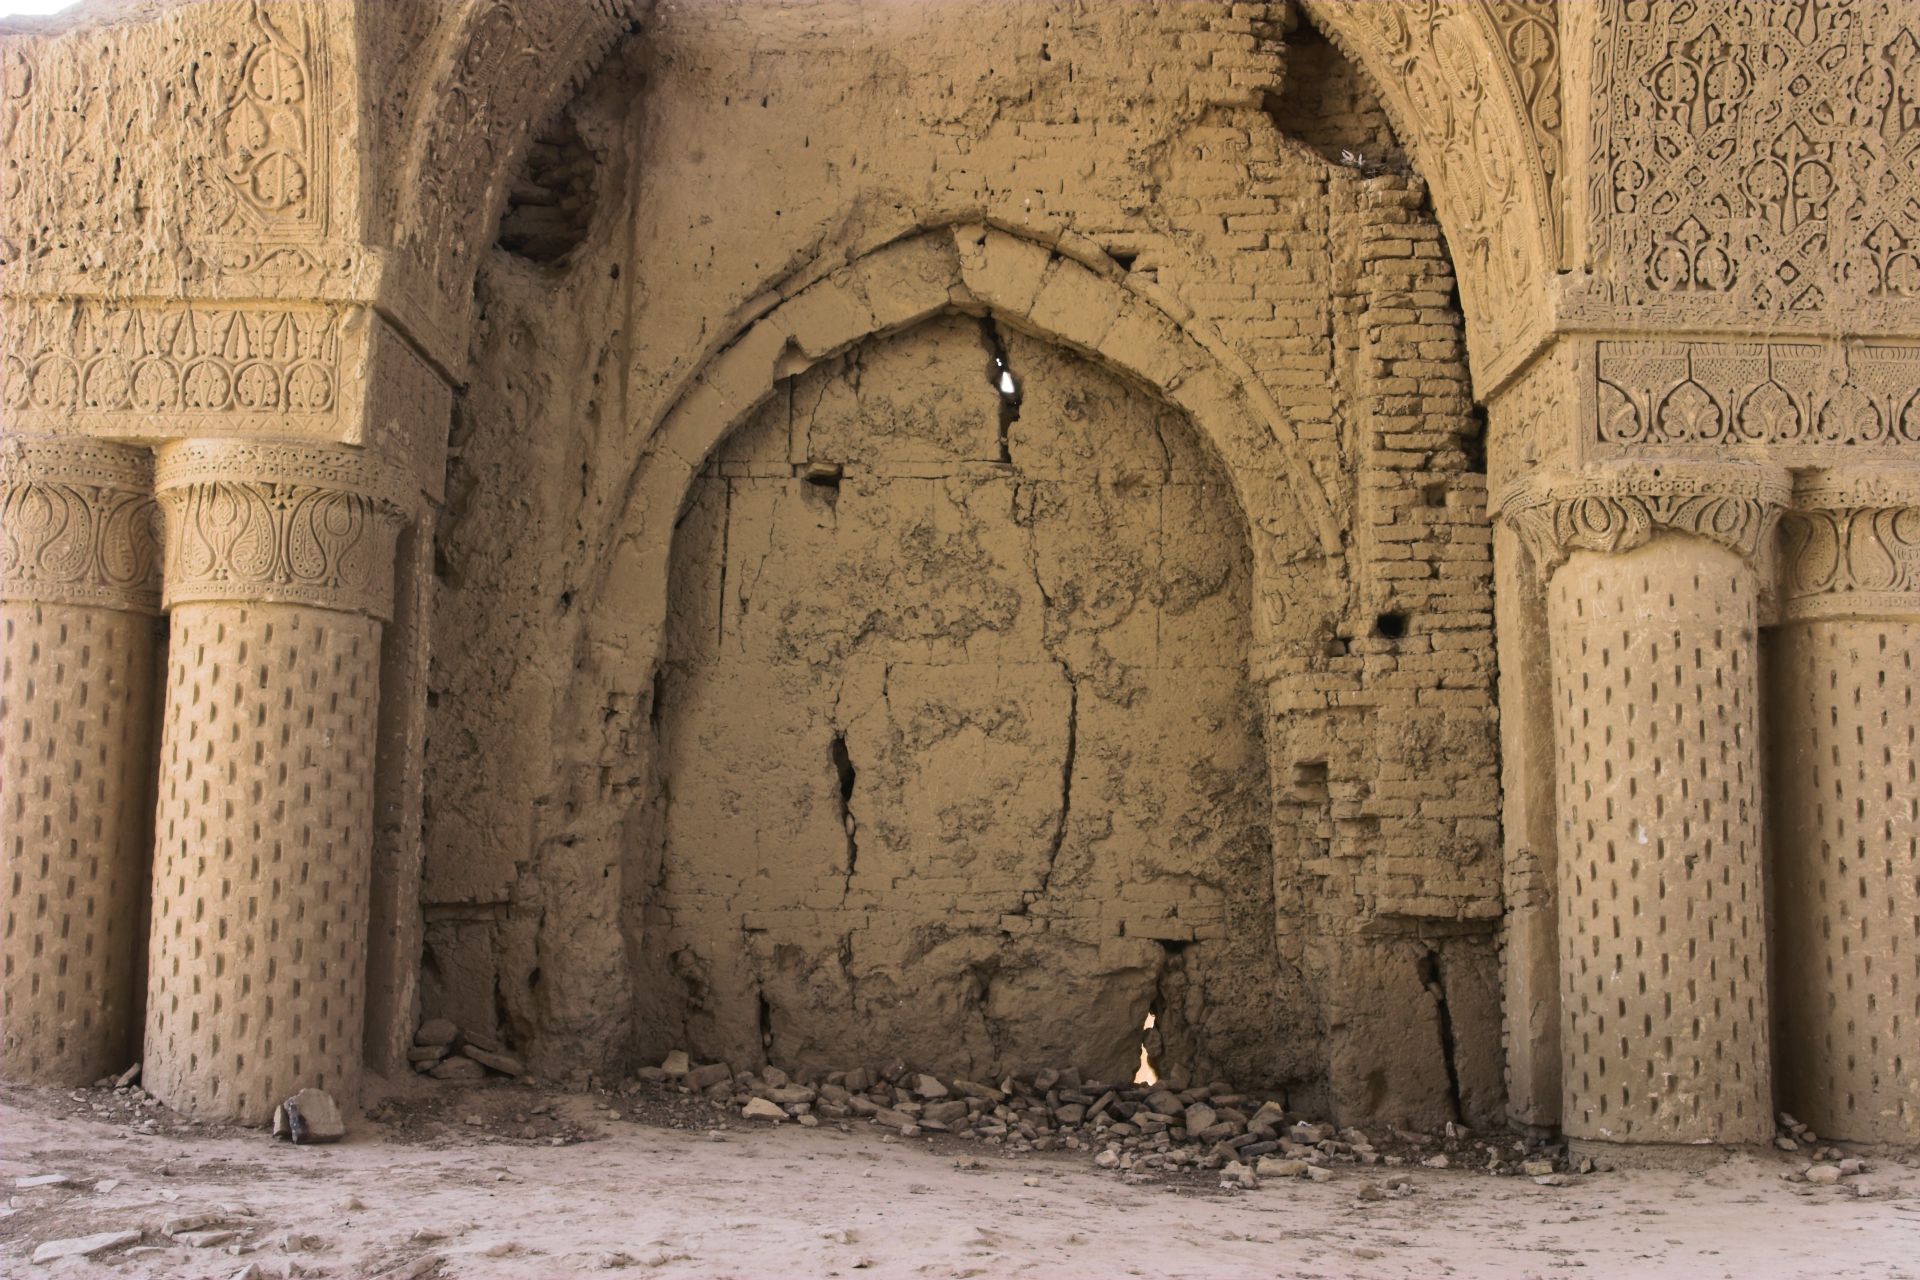 New Threats to Heritage in the Taliban’s Afghanistan